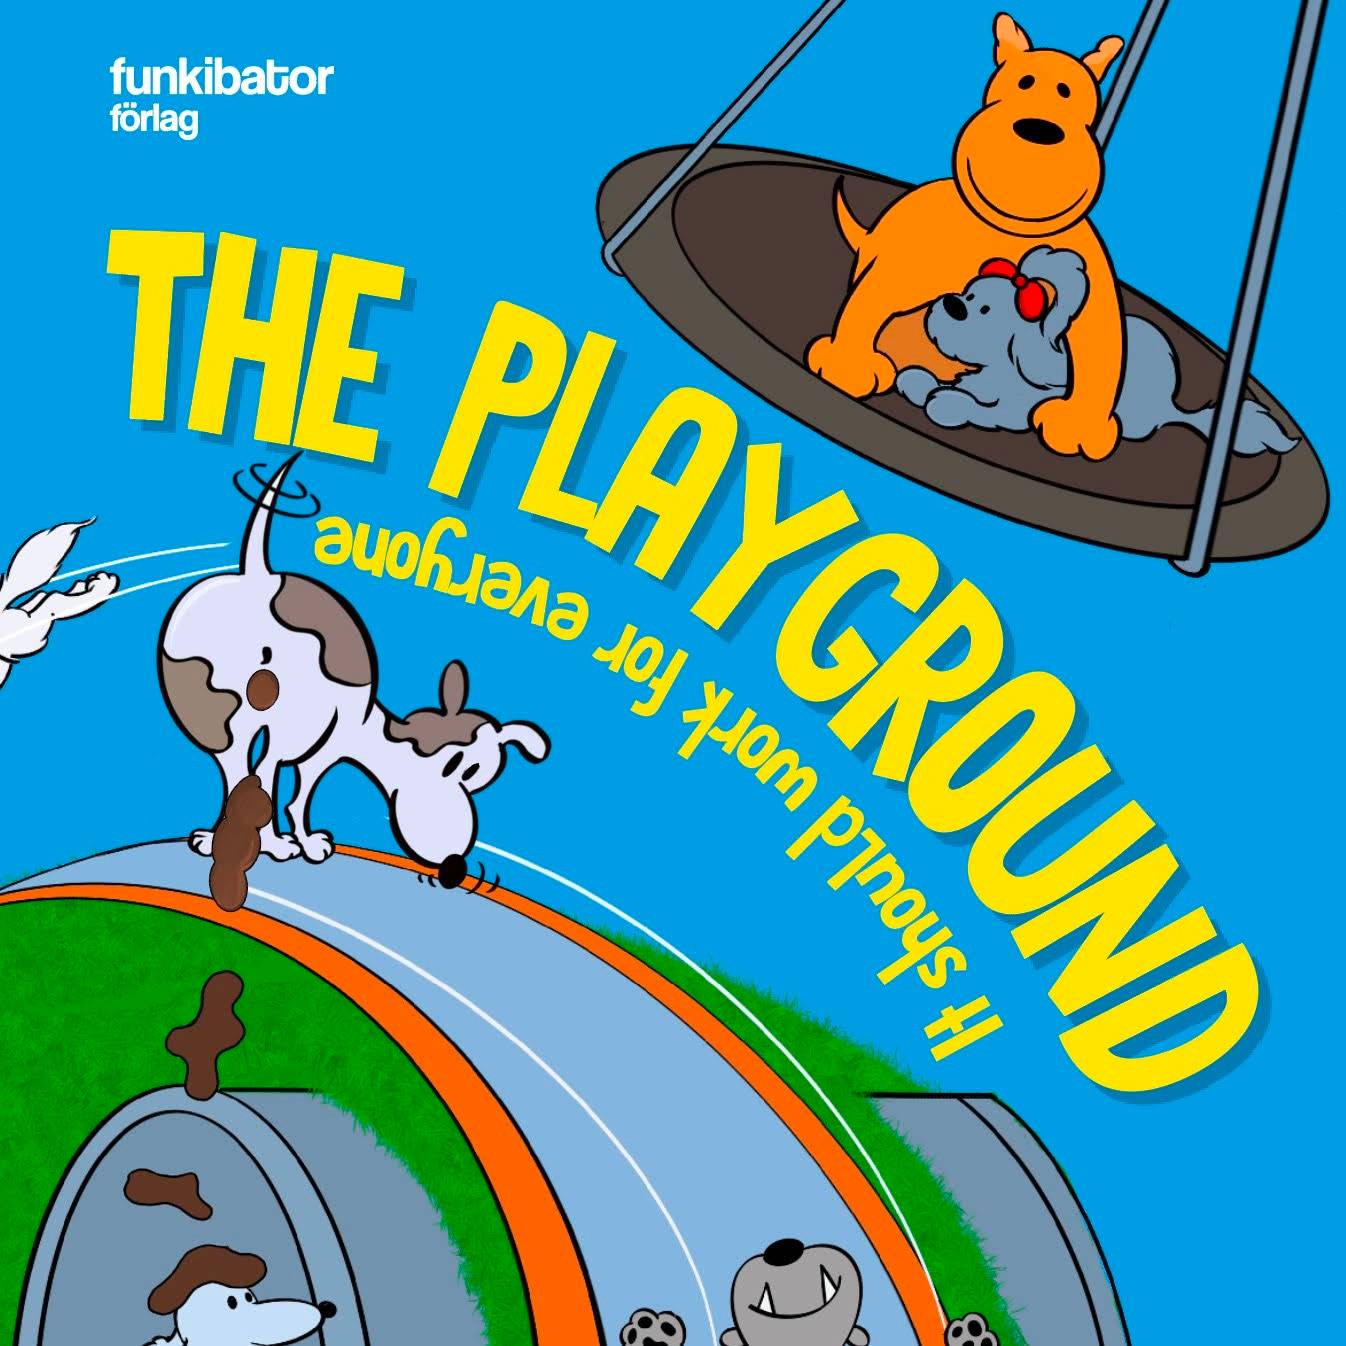 The playground : it should work for everyone